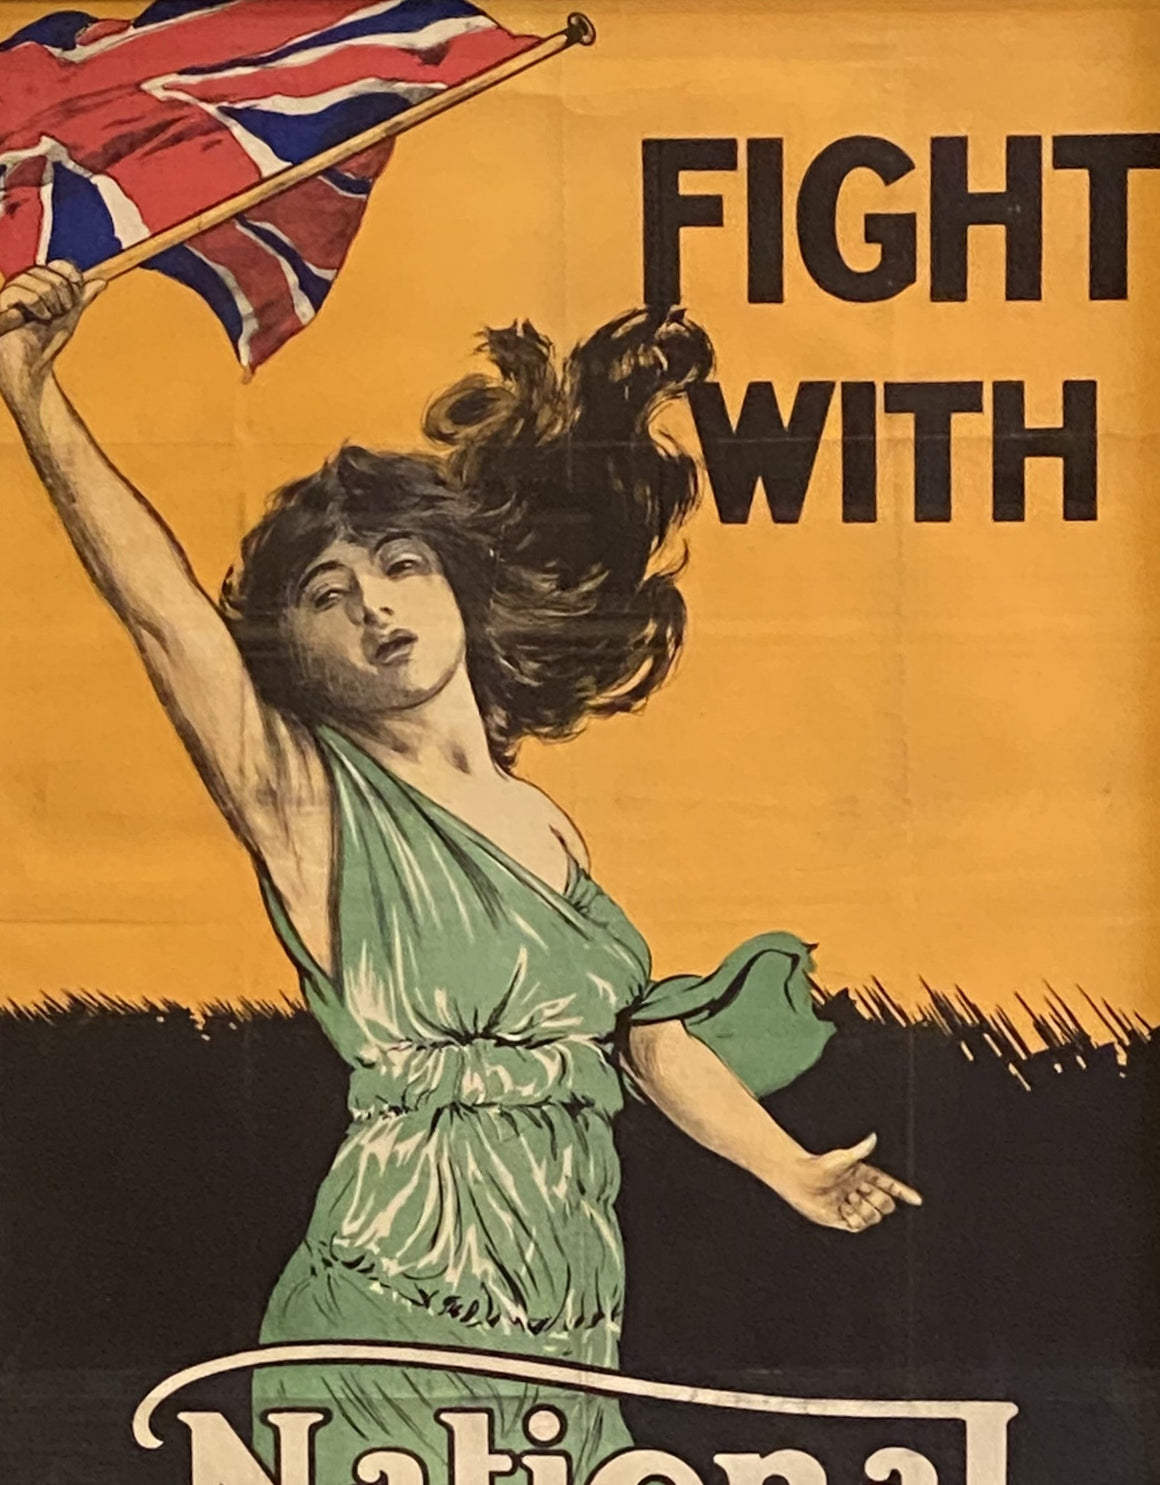 "Fight With National War Bonds" Vintage British WWI Poster, Circa 1917-18